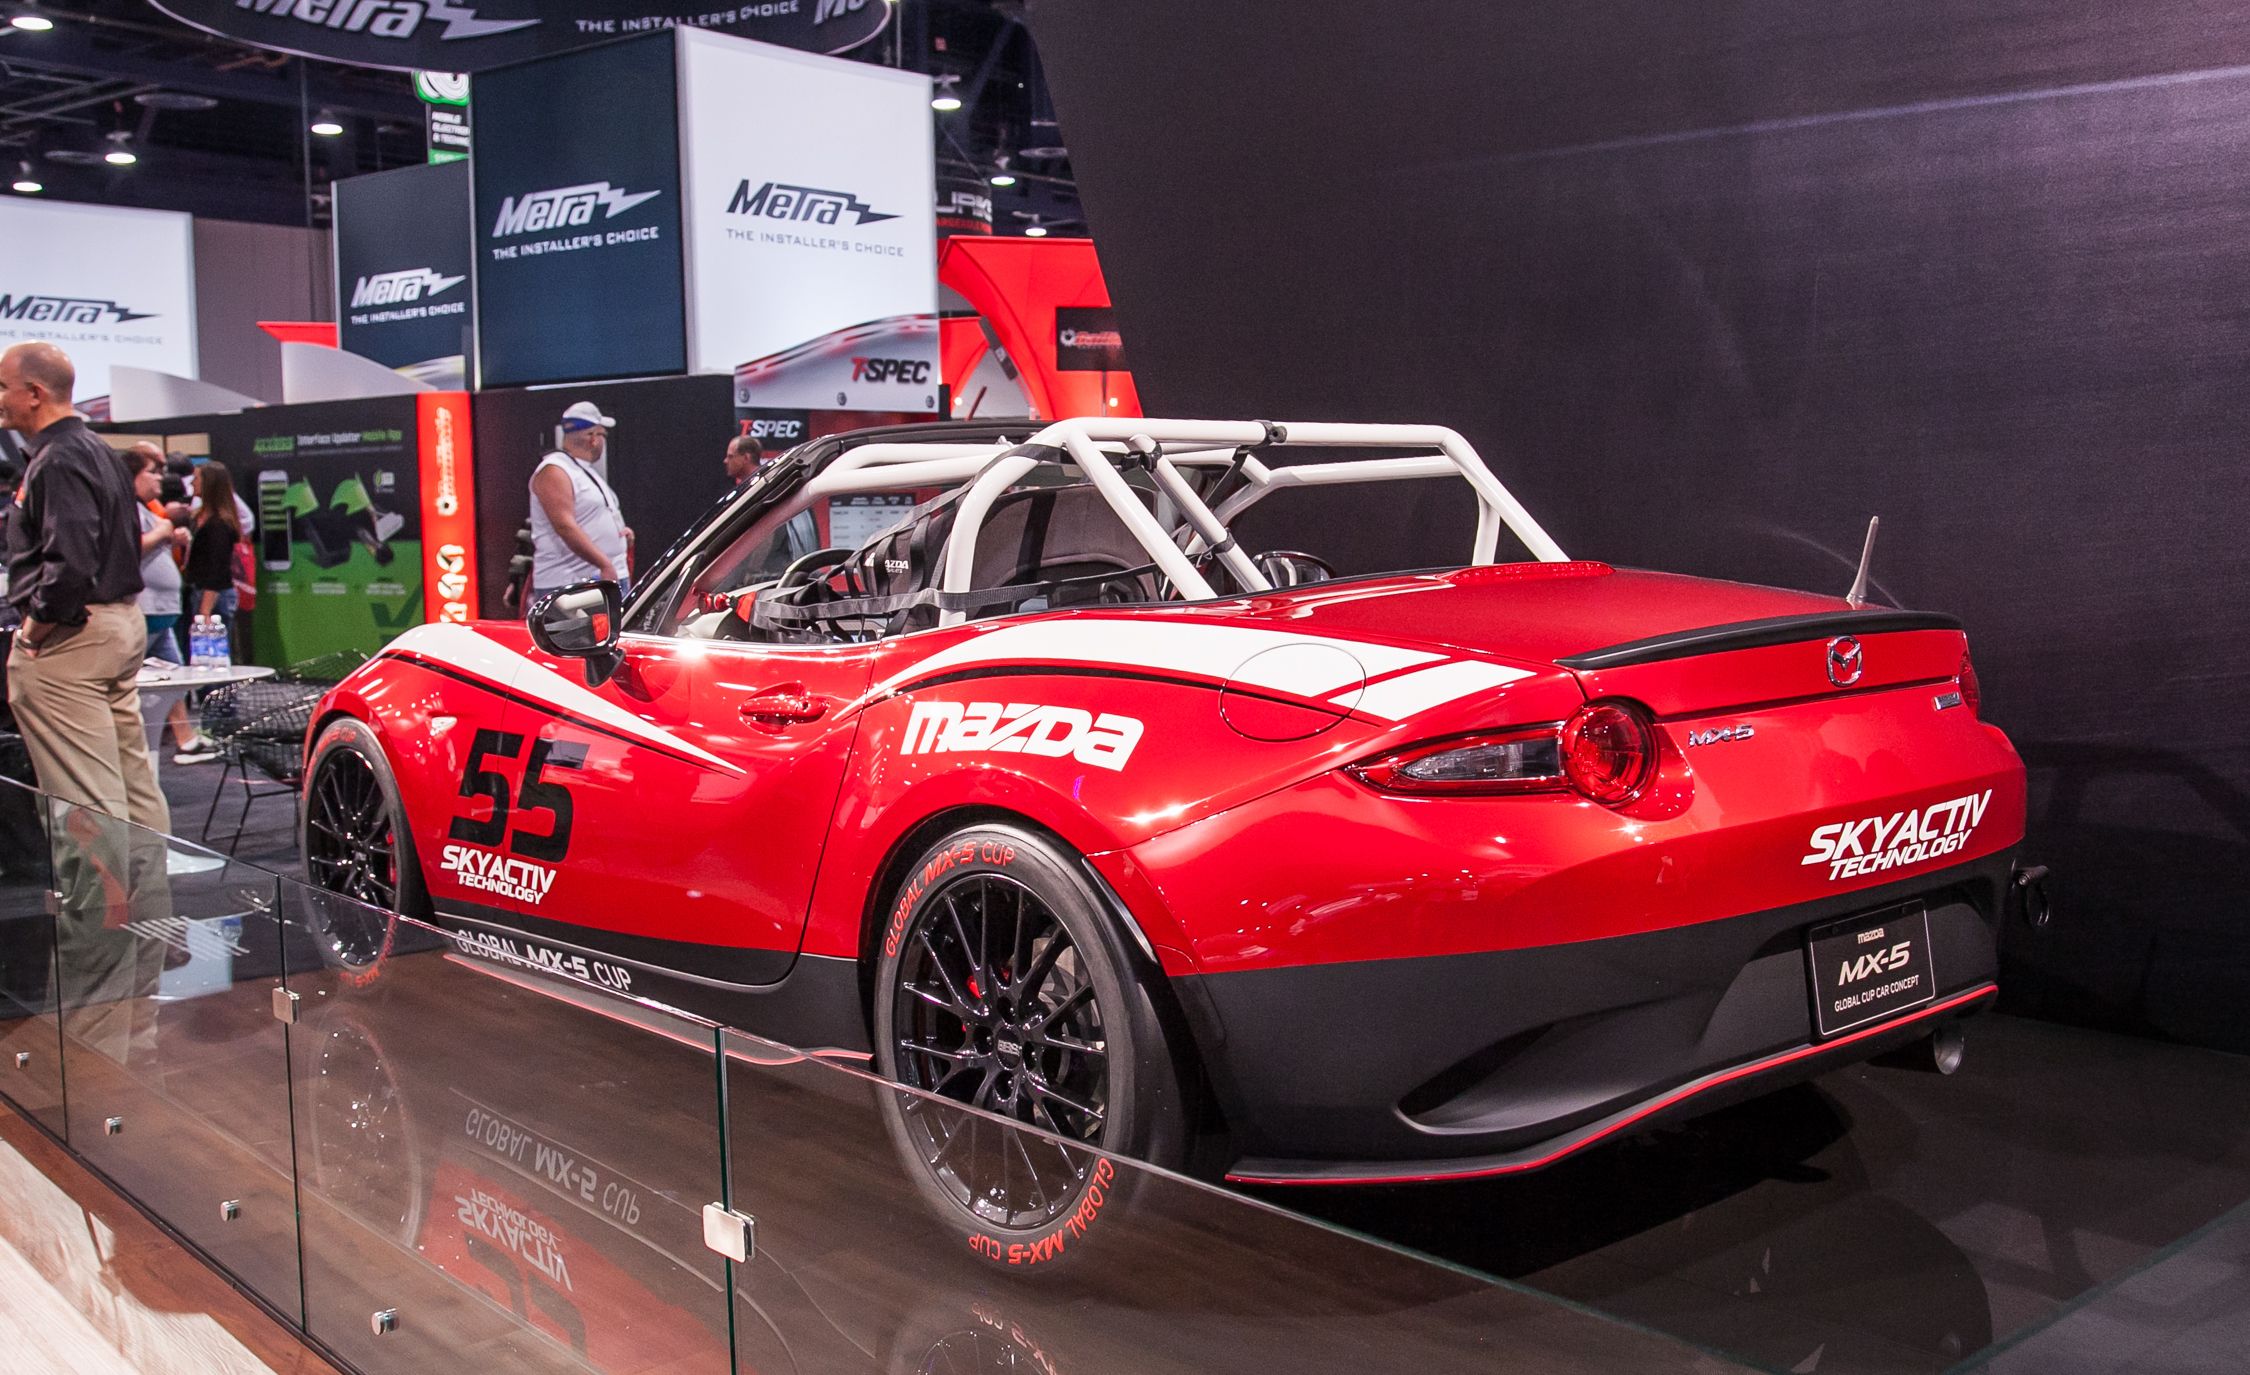 Kerkbank Verknald Ophef 9 Things You Need to Know About the 2016 Mazda MX-5 Miata Cup Race Car